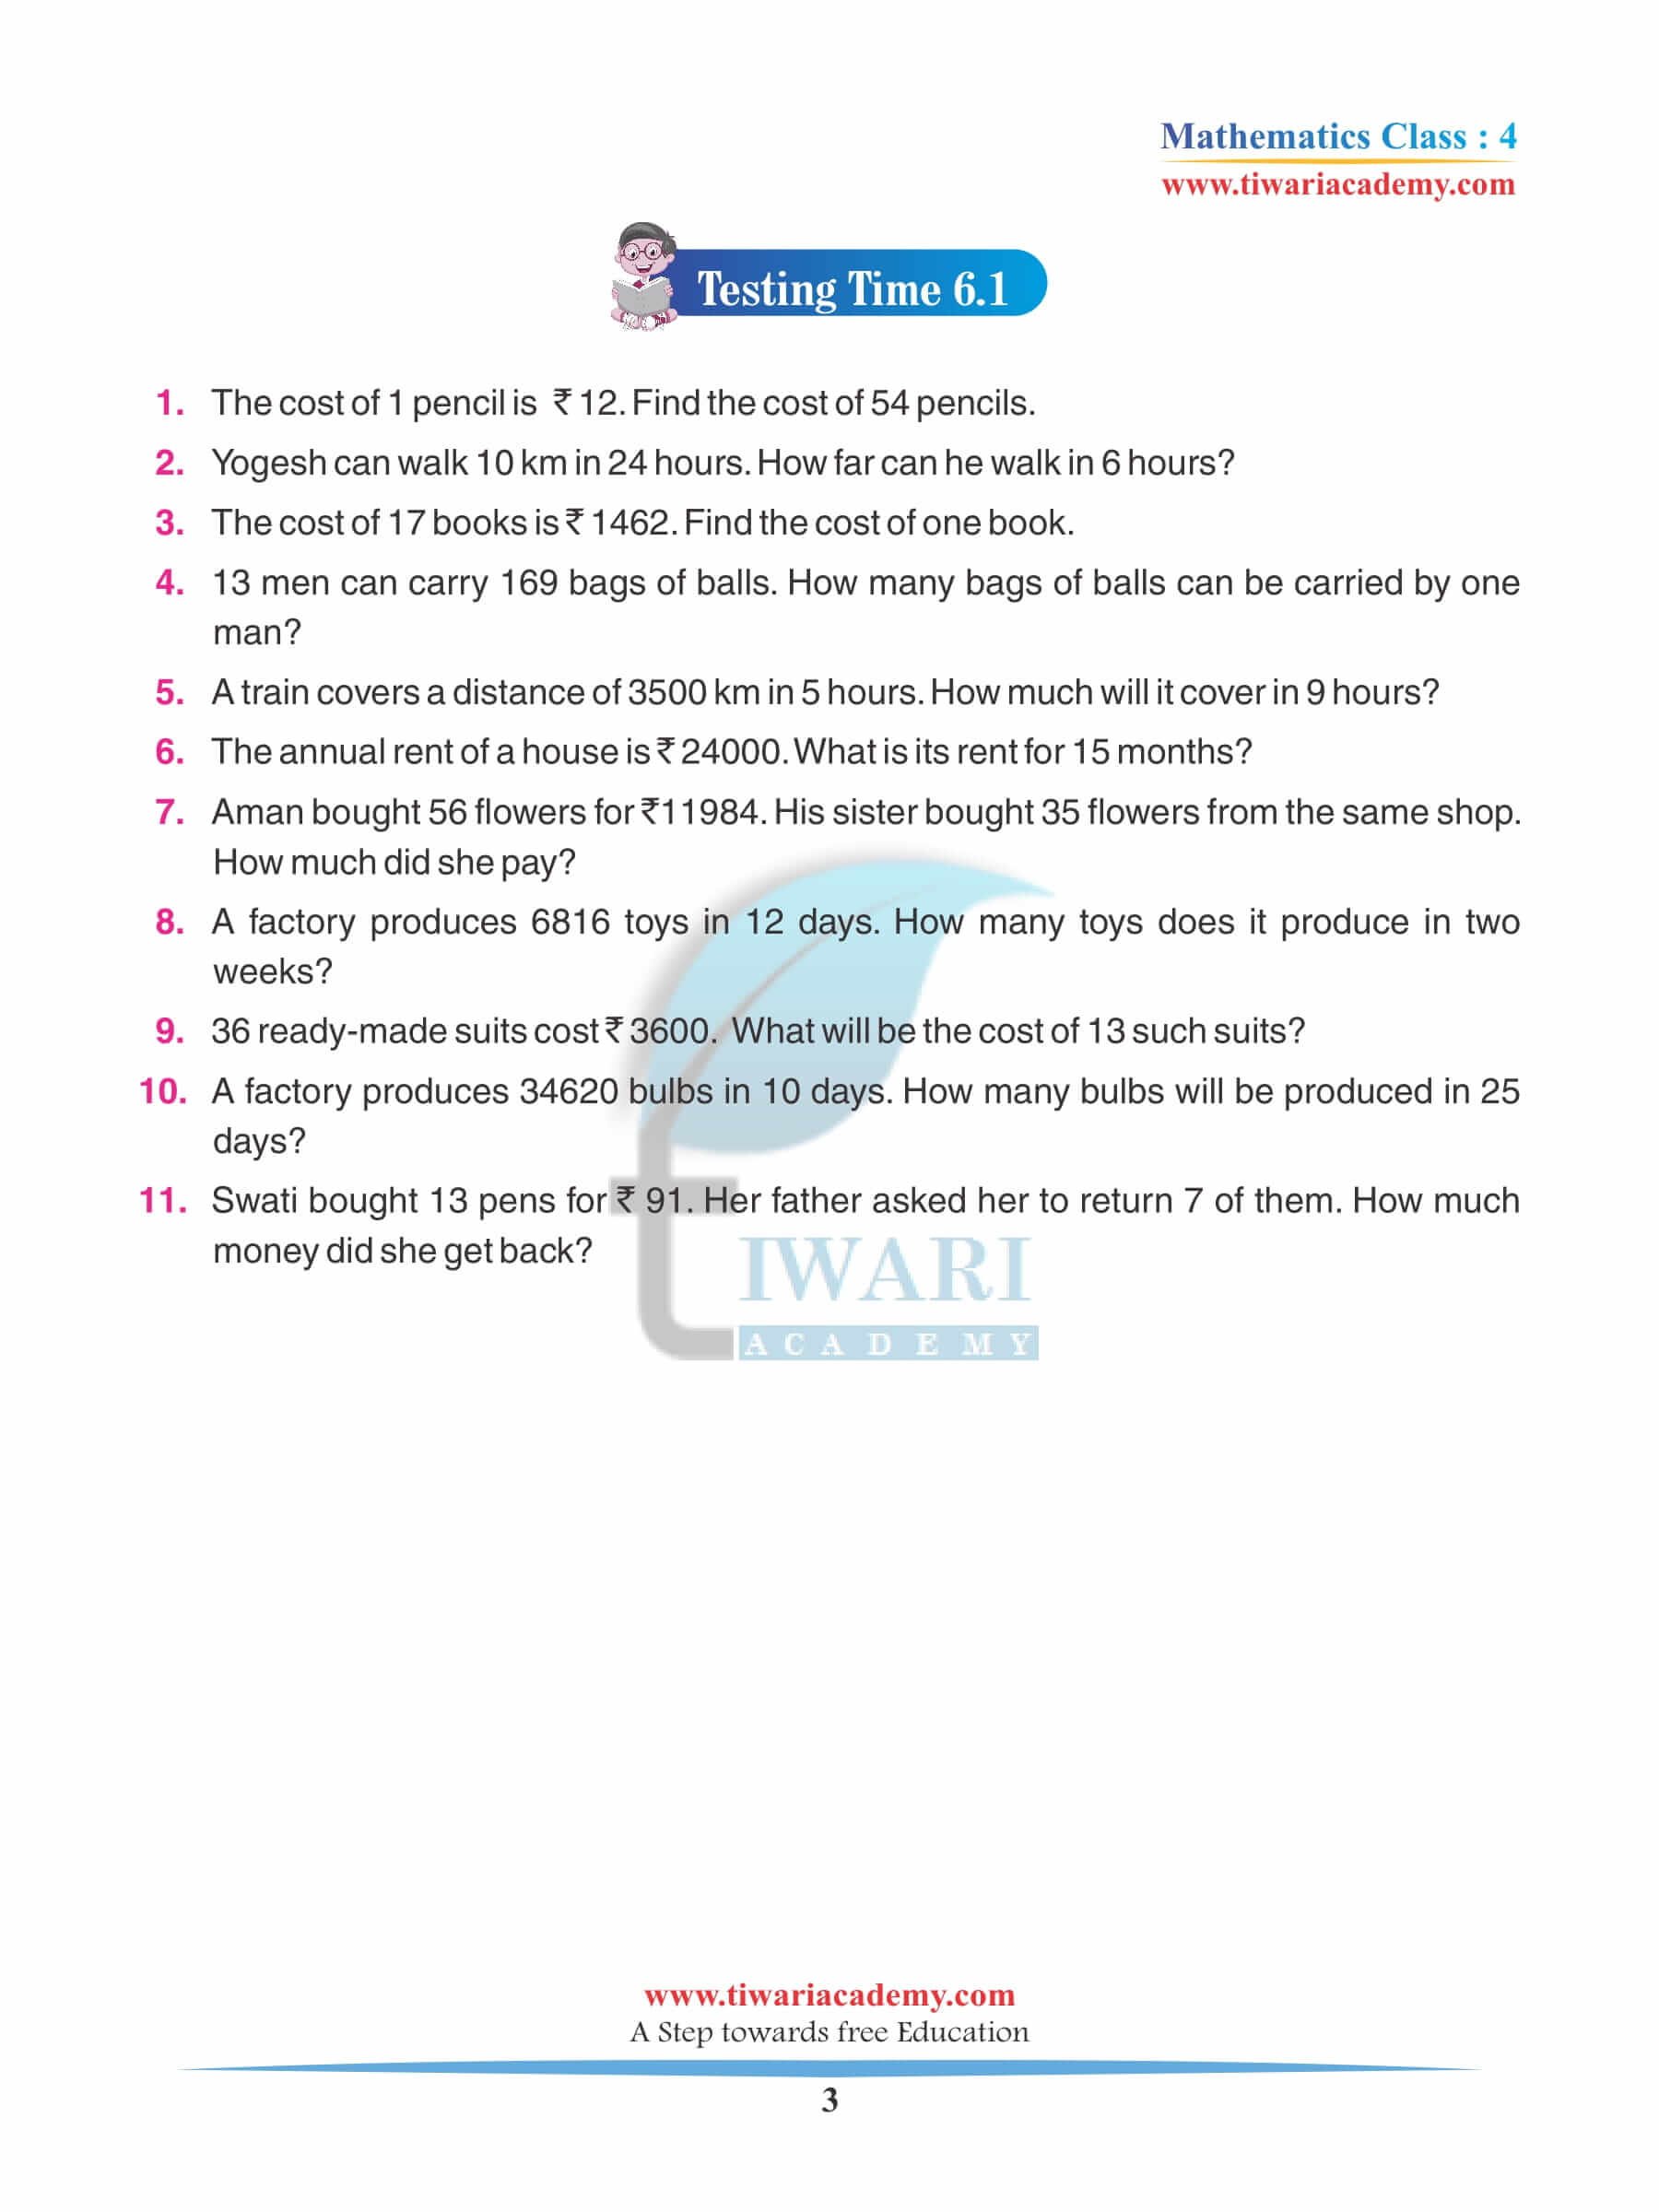 Class 4 Maths Chapter 6 Revision Exercises